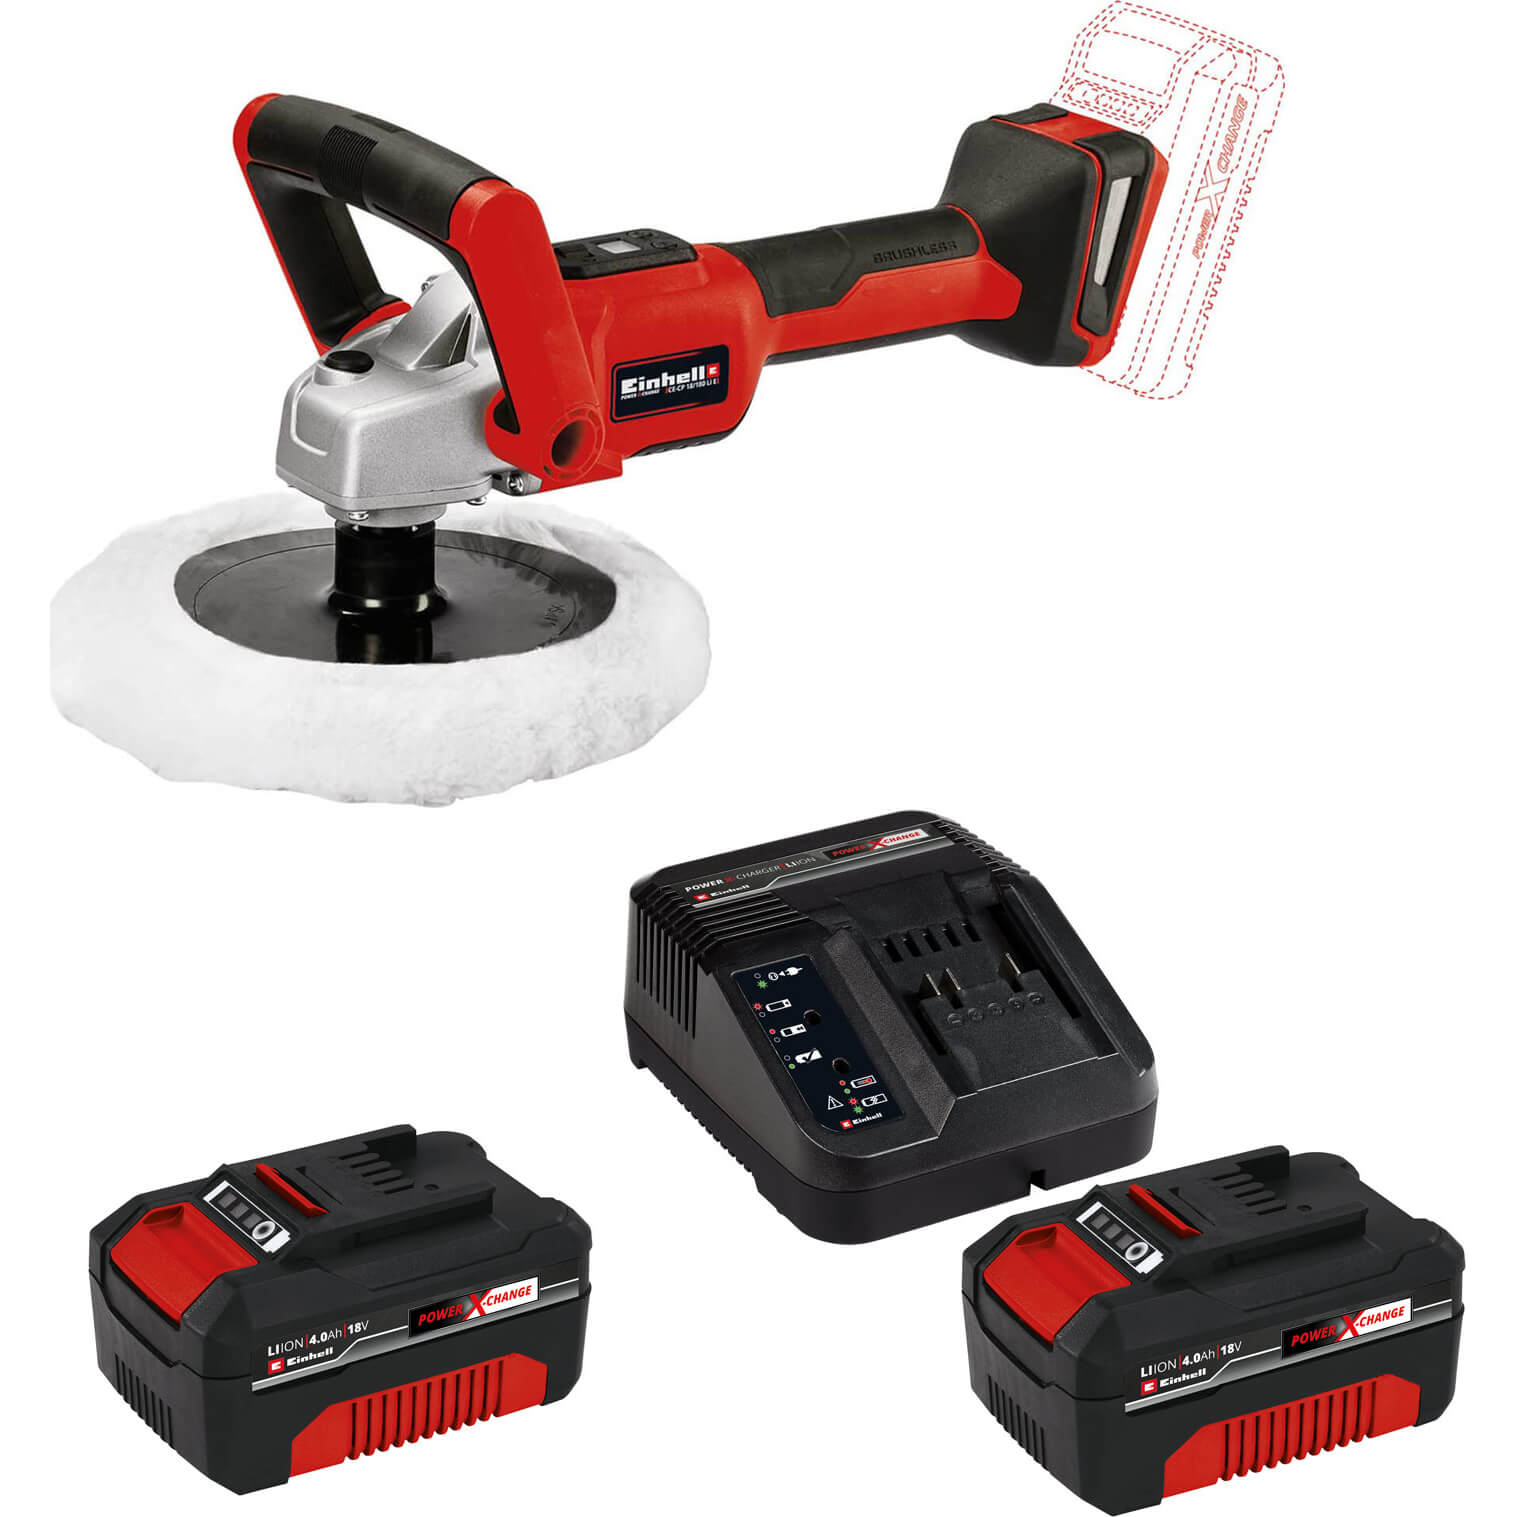 Image of Einhell CE-CP 18/180 Li 18v Cordless Polisher and Sander 180mm 2 x 4ah Li-ion Charger No Case